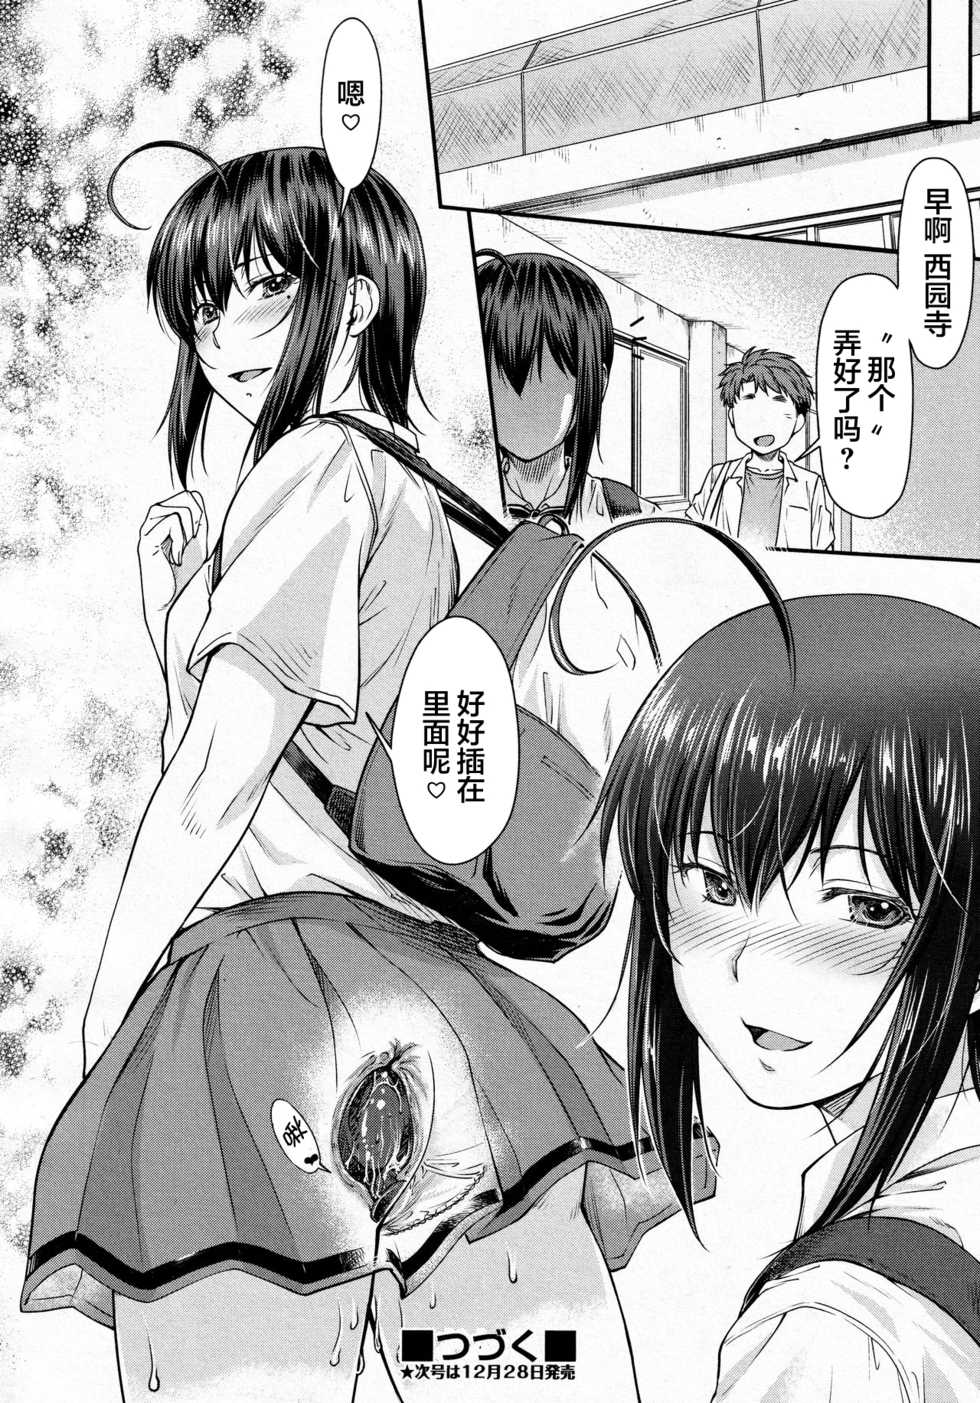 [Nagare Ippon] Kaname Date #11 (COMIC AUN 2020-12) [Chinese] [不可视汉化] [Digital] - Page 29